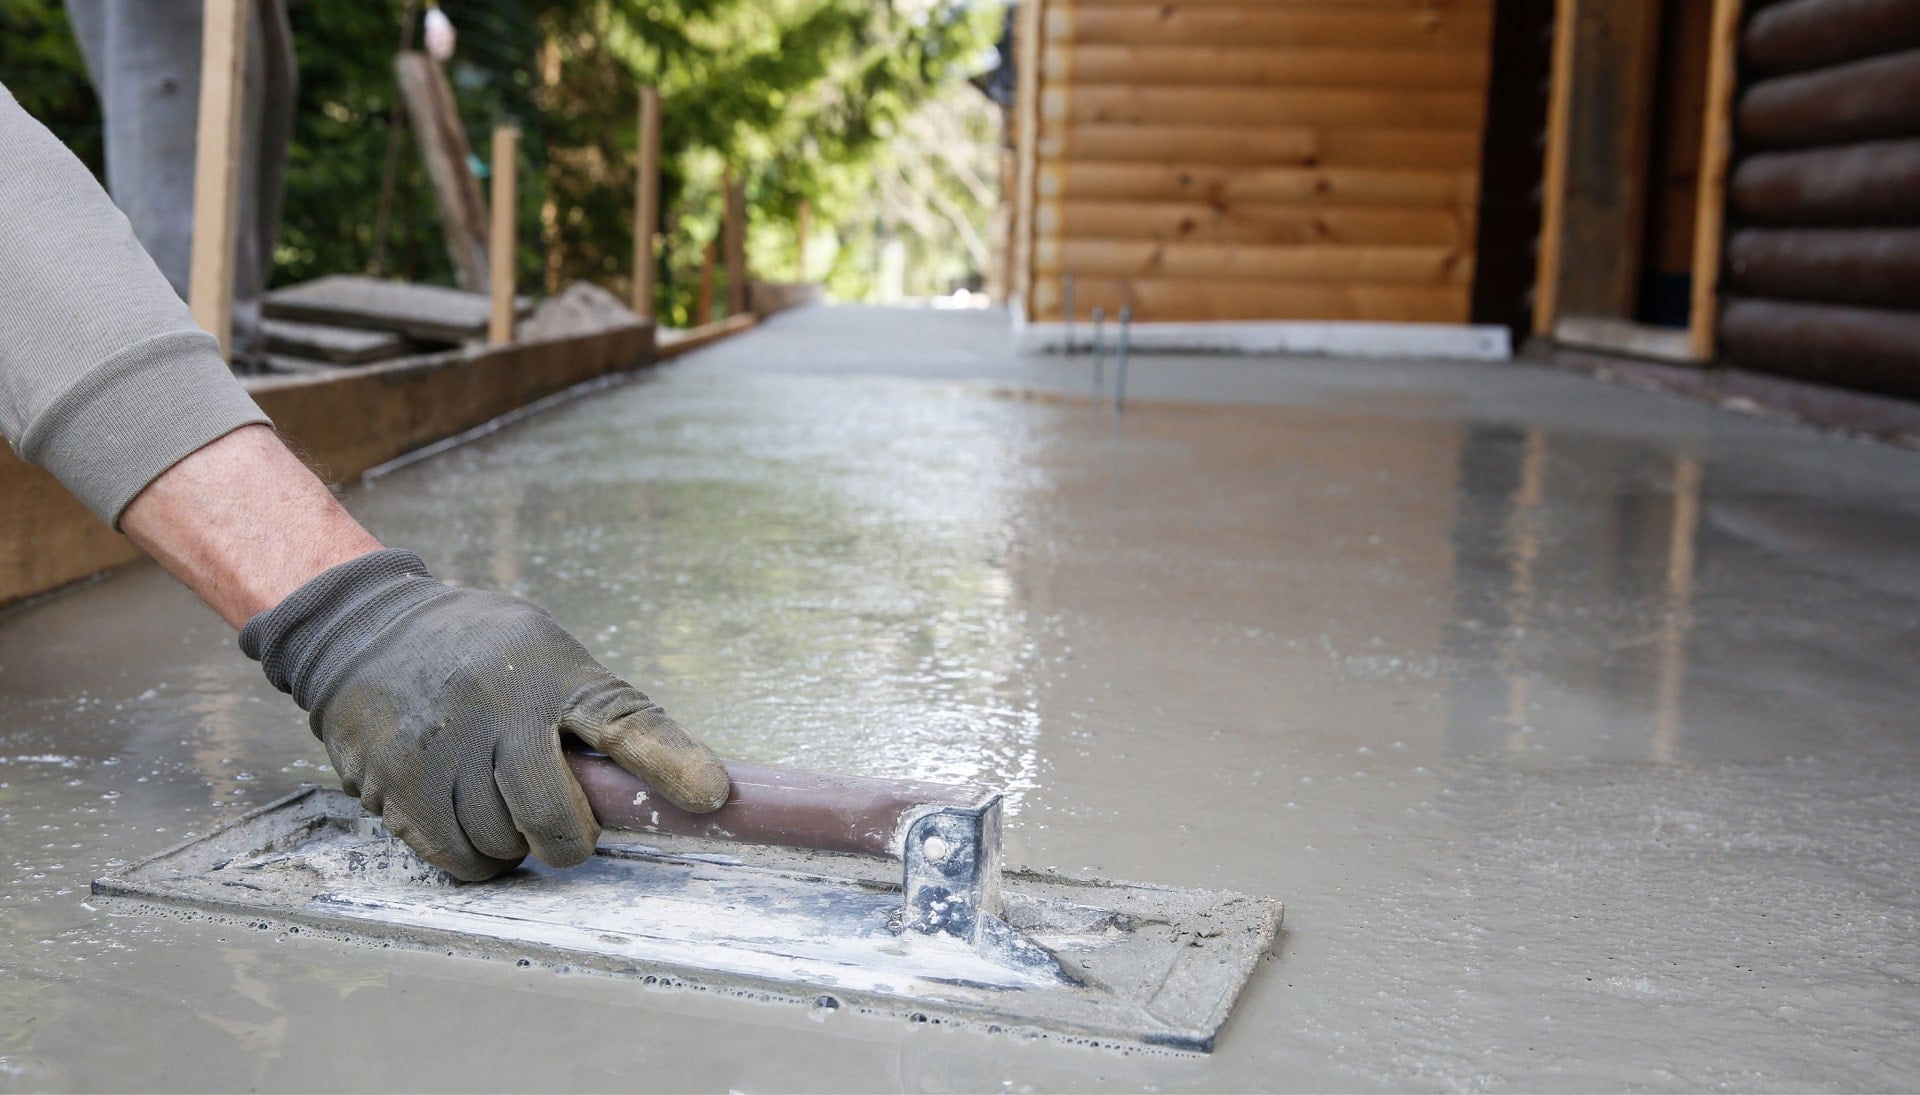 Smooth and Level Your Floors with Precision Concrete Floor Leveling Services in Los Angeles, CA - Eliminate Uneven Surfaces, Tripping Hazards, and Costly Damages with State-of-the-Art Equipment and Skilled Professionals.